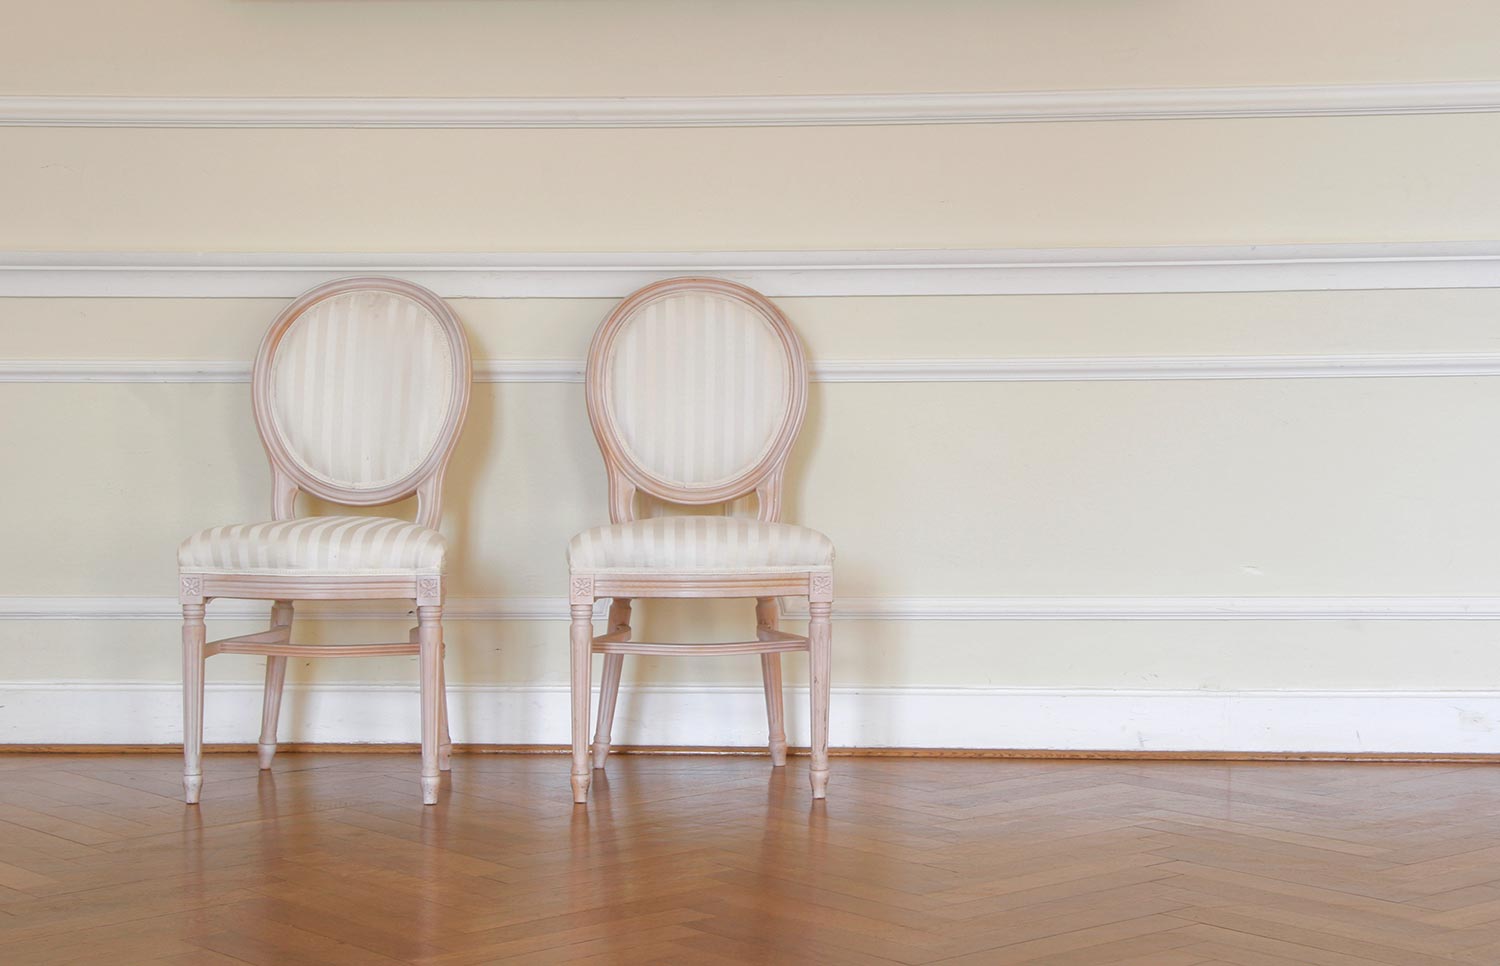 Pair of antic chairs in a classic interior setting